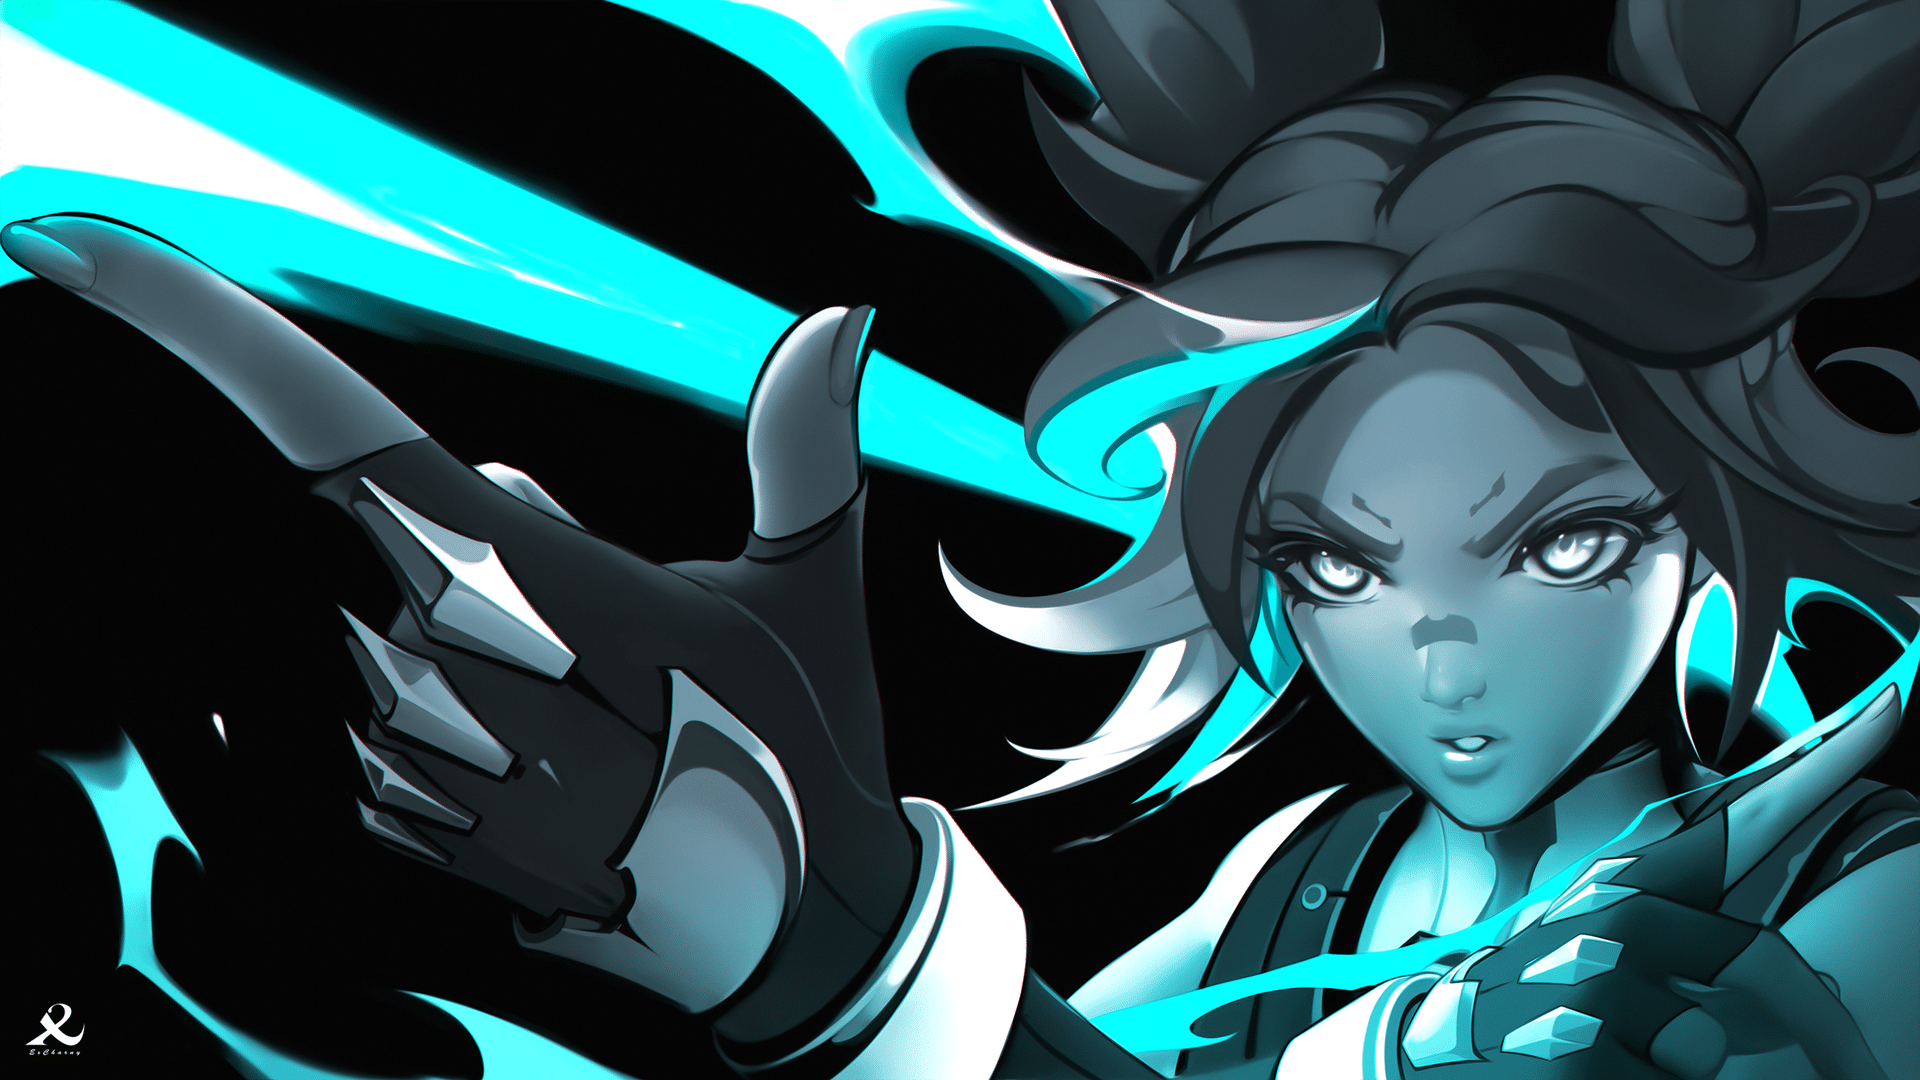 Image by Excharny – Neon using her finger guns over a teal color theme.